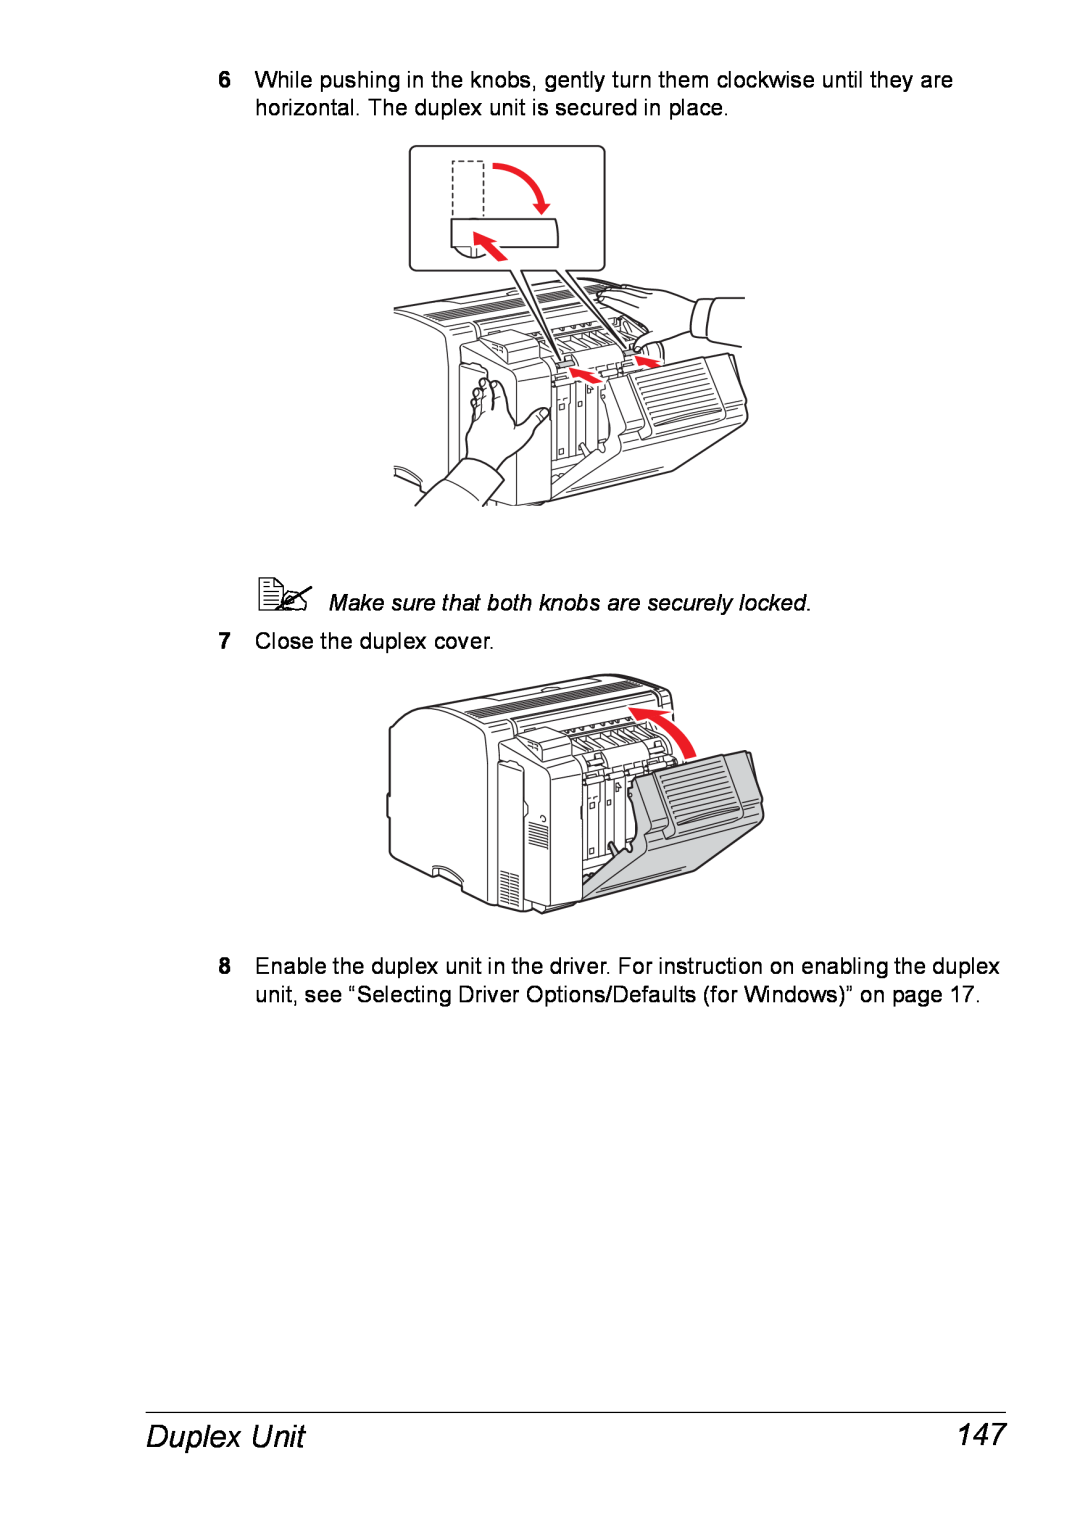 Xerox 6120 manual Duplex Unit,  Make sure that both knobs are securely locked, Close the duplex cover 